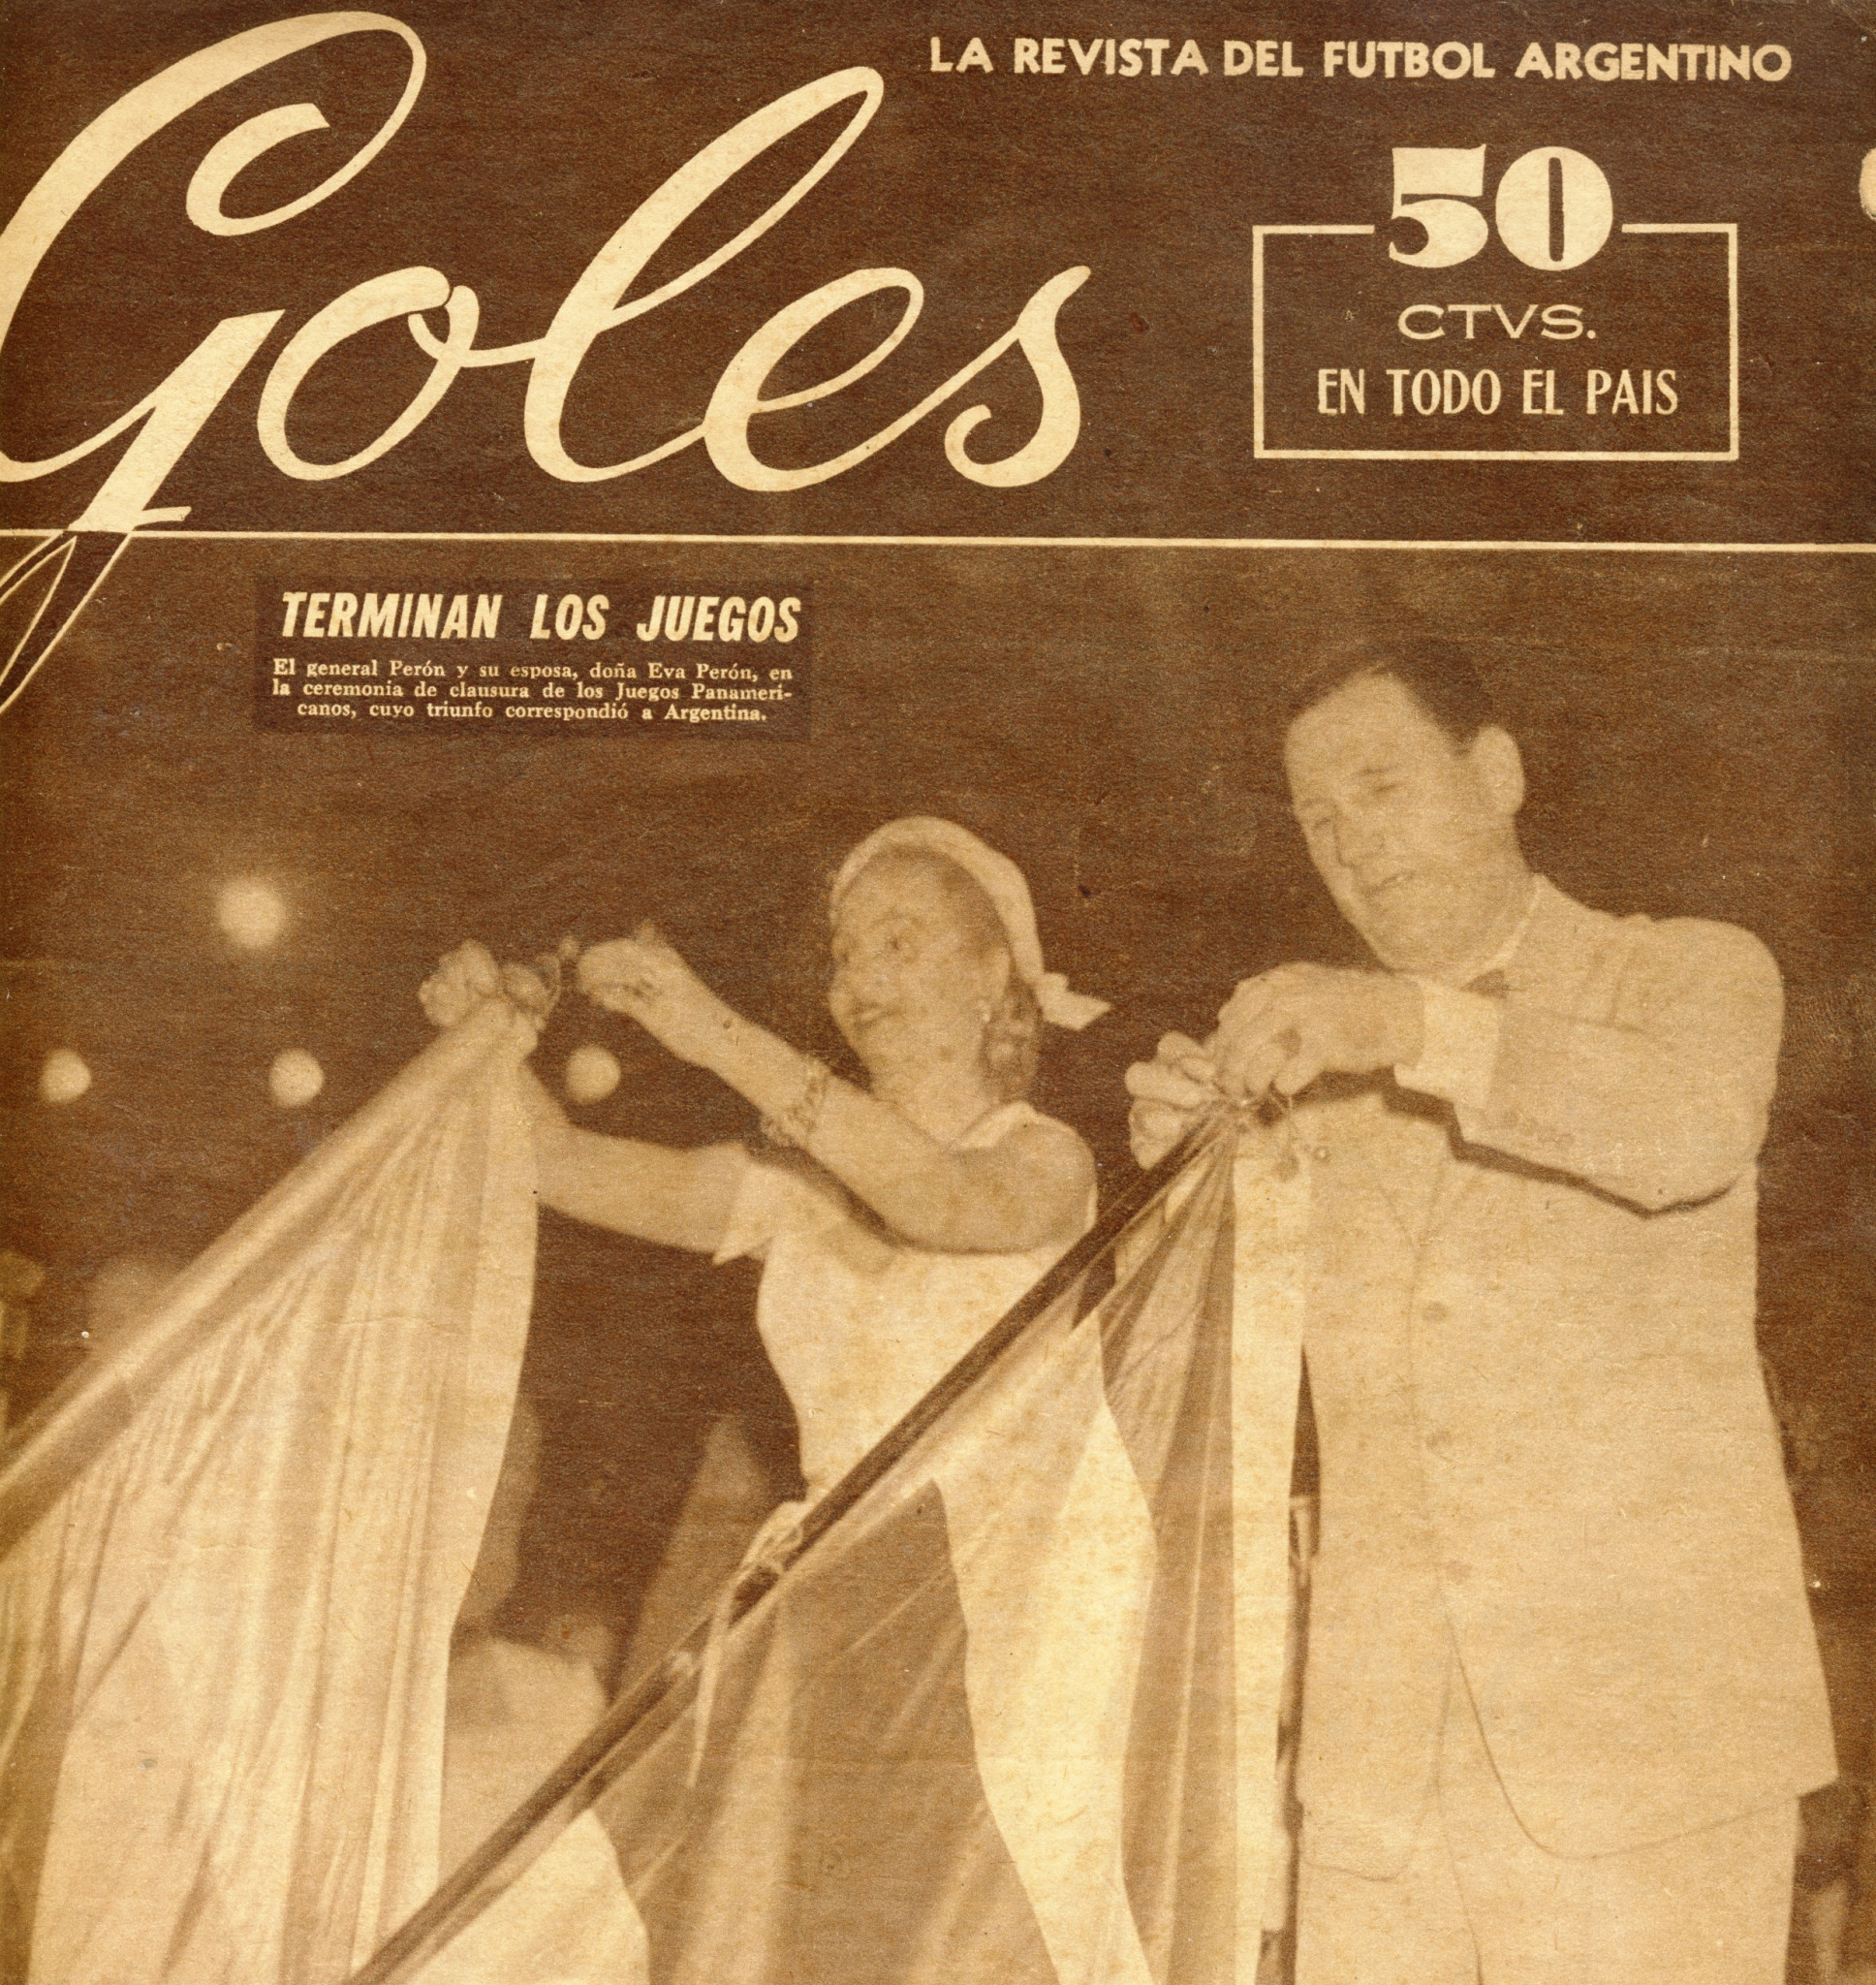 A magazine shows the Peróns at the end of the 1951 Pan American Games ©Philip Barker